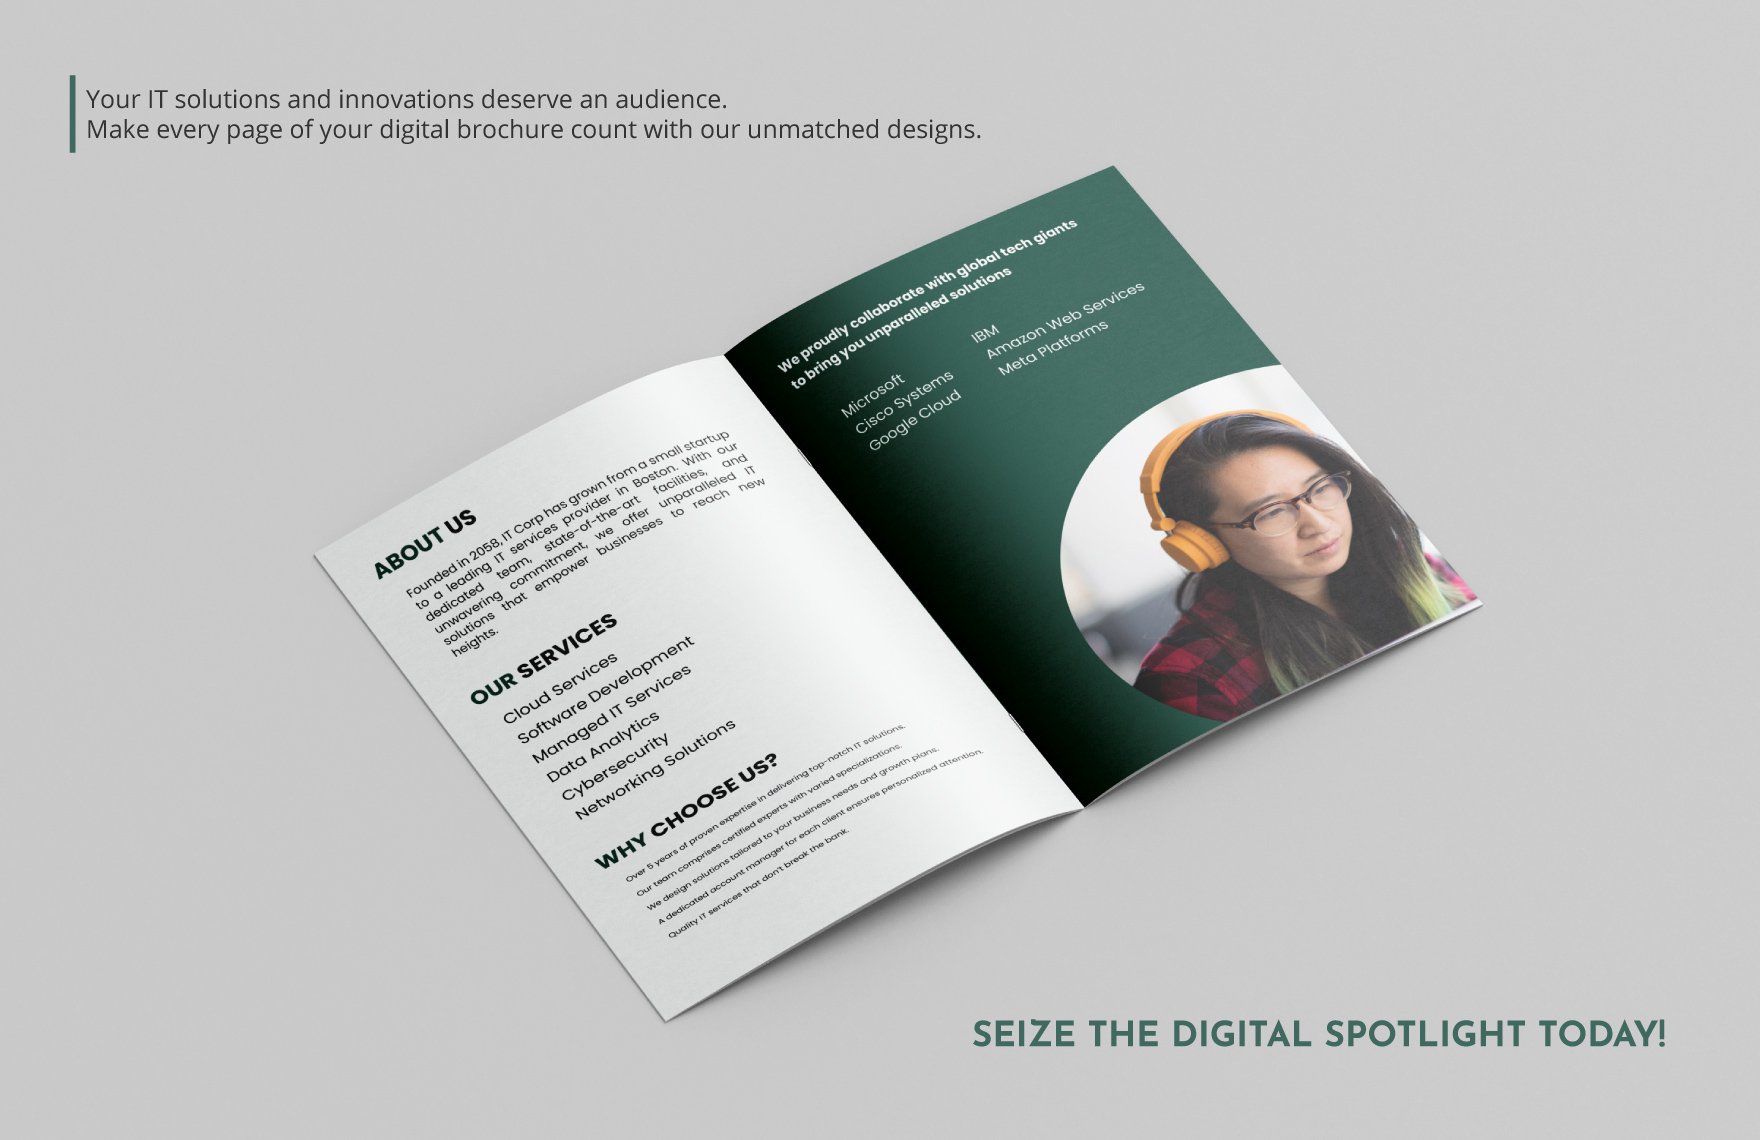 Managed IT Services Company Profile Digital Brochure Template